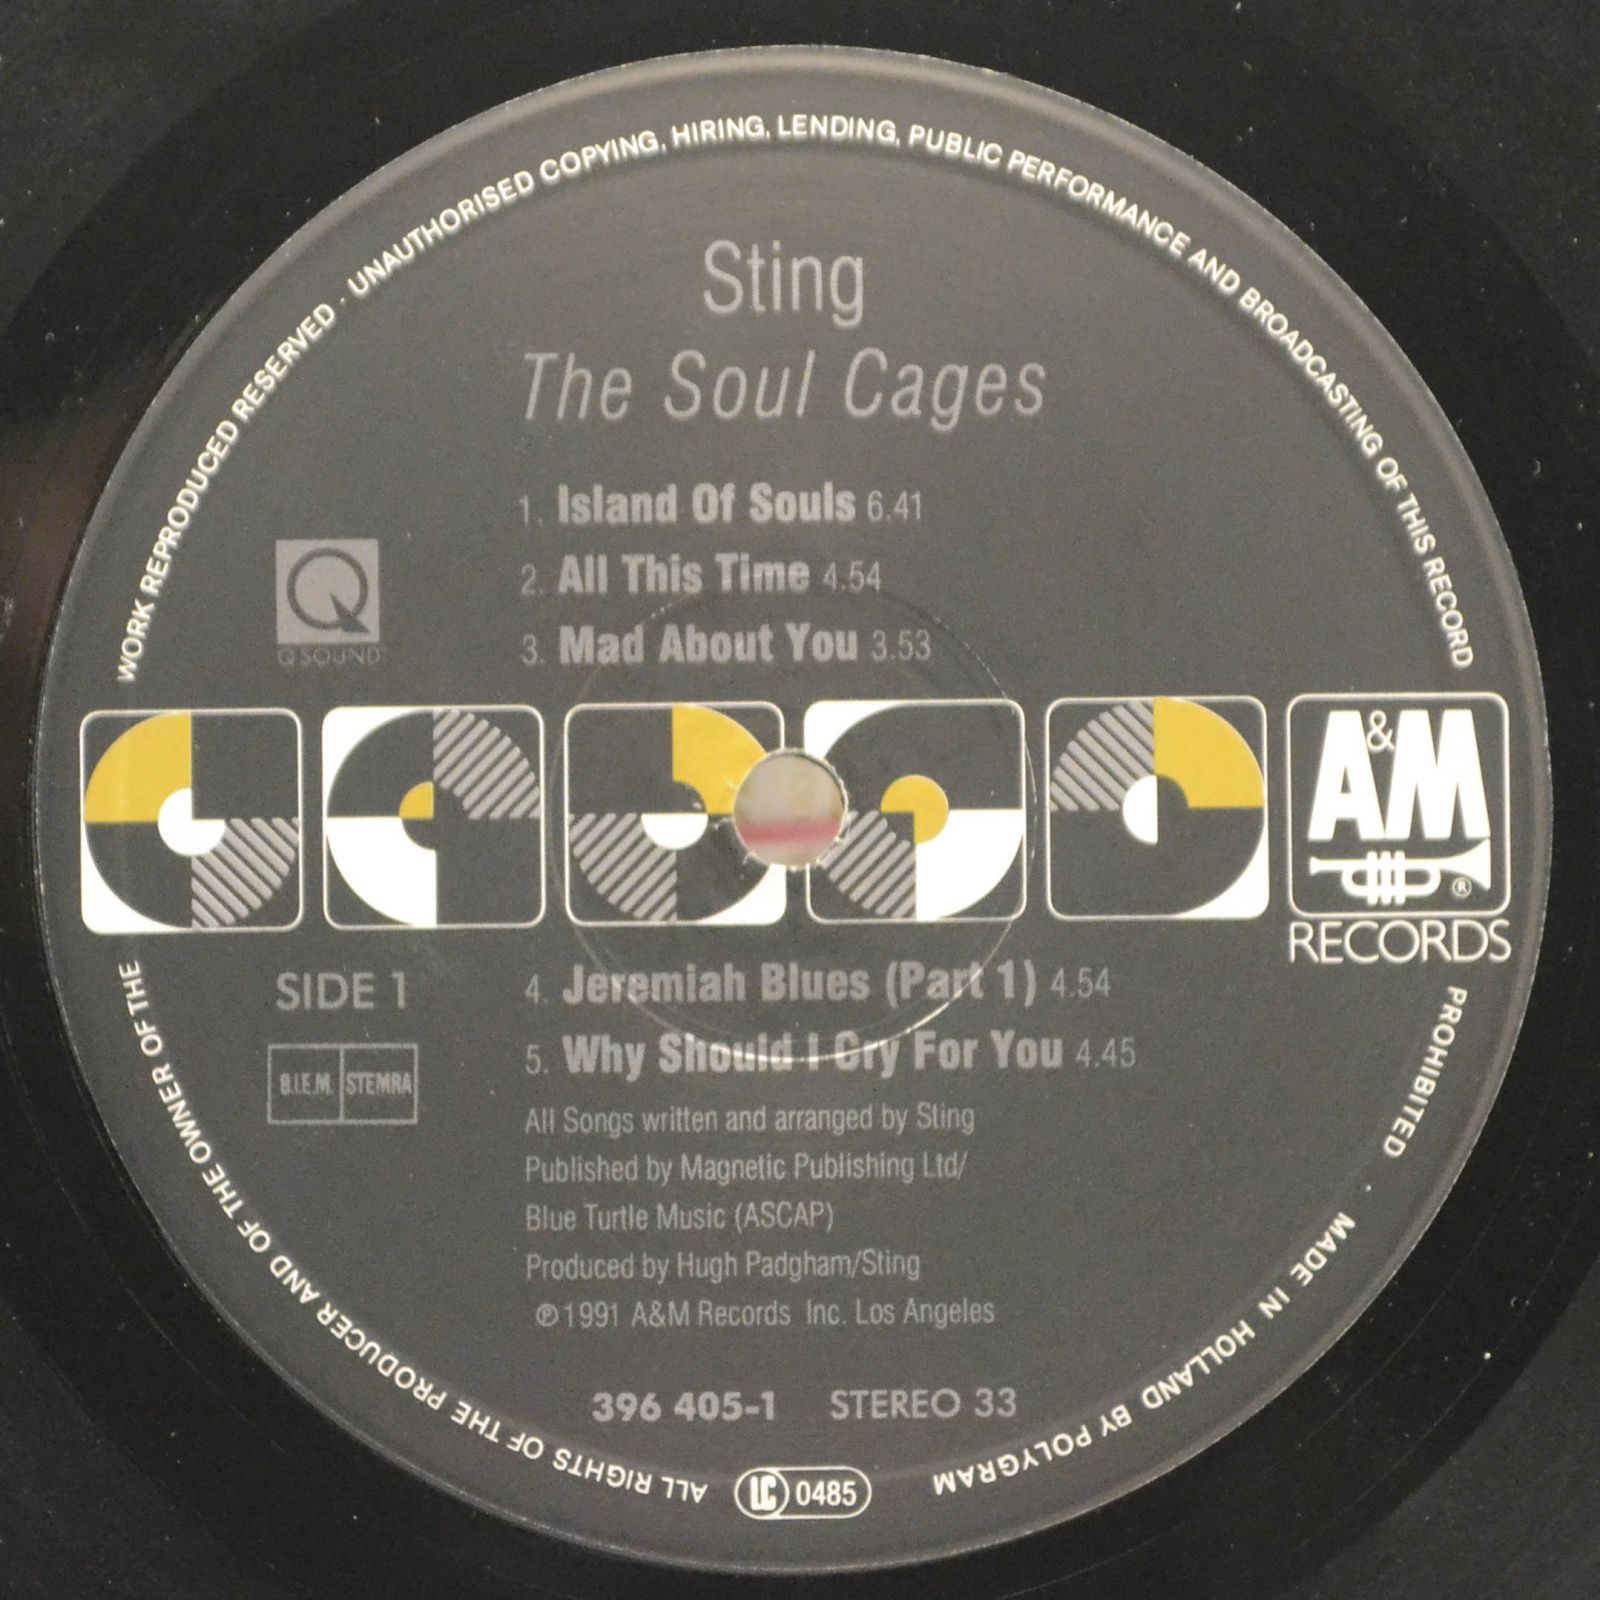 Sting — The Soul Cages, 1991